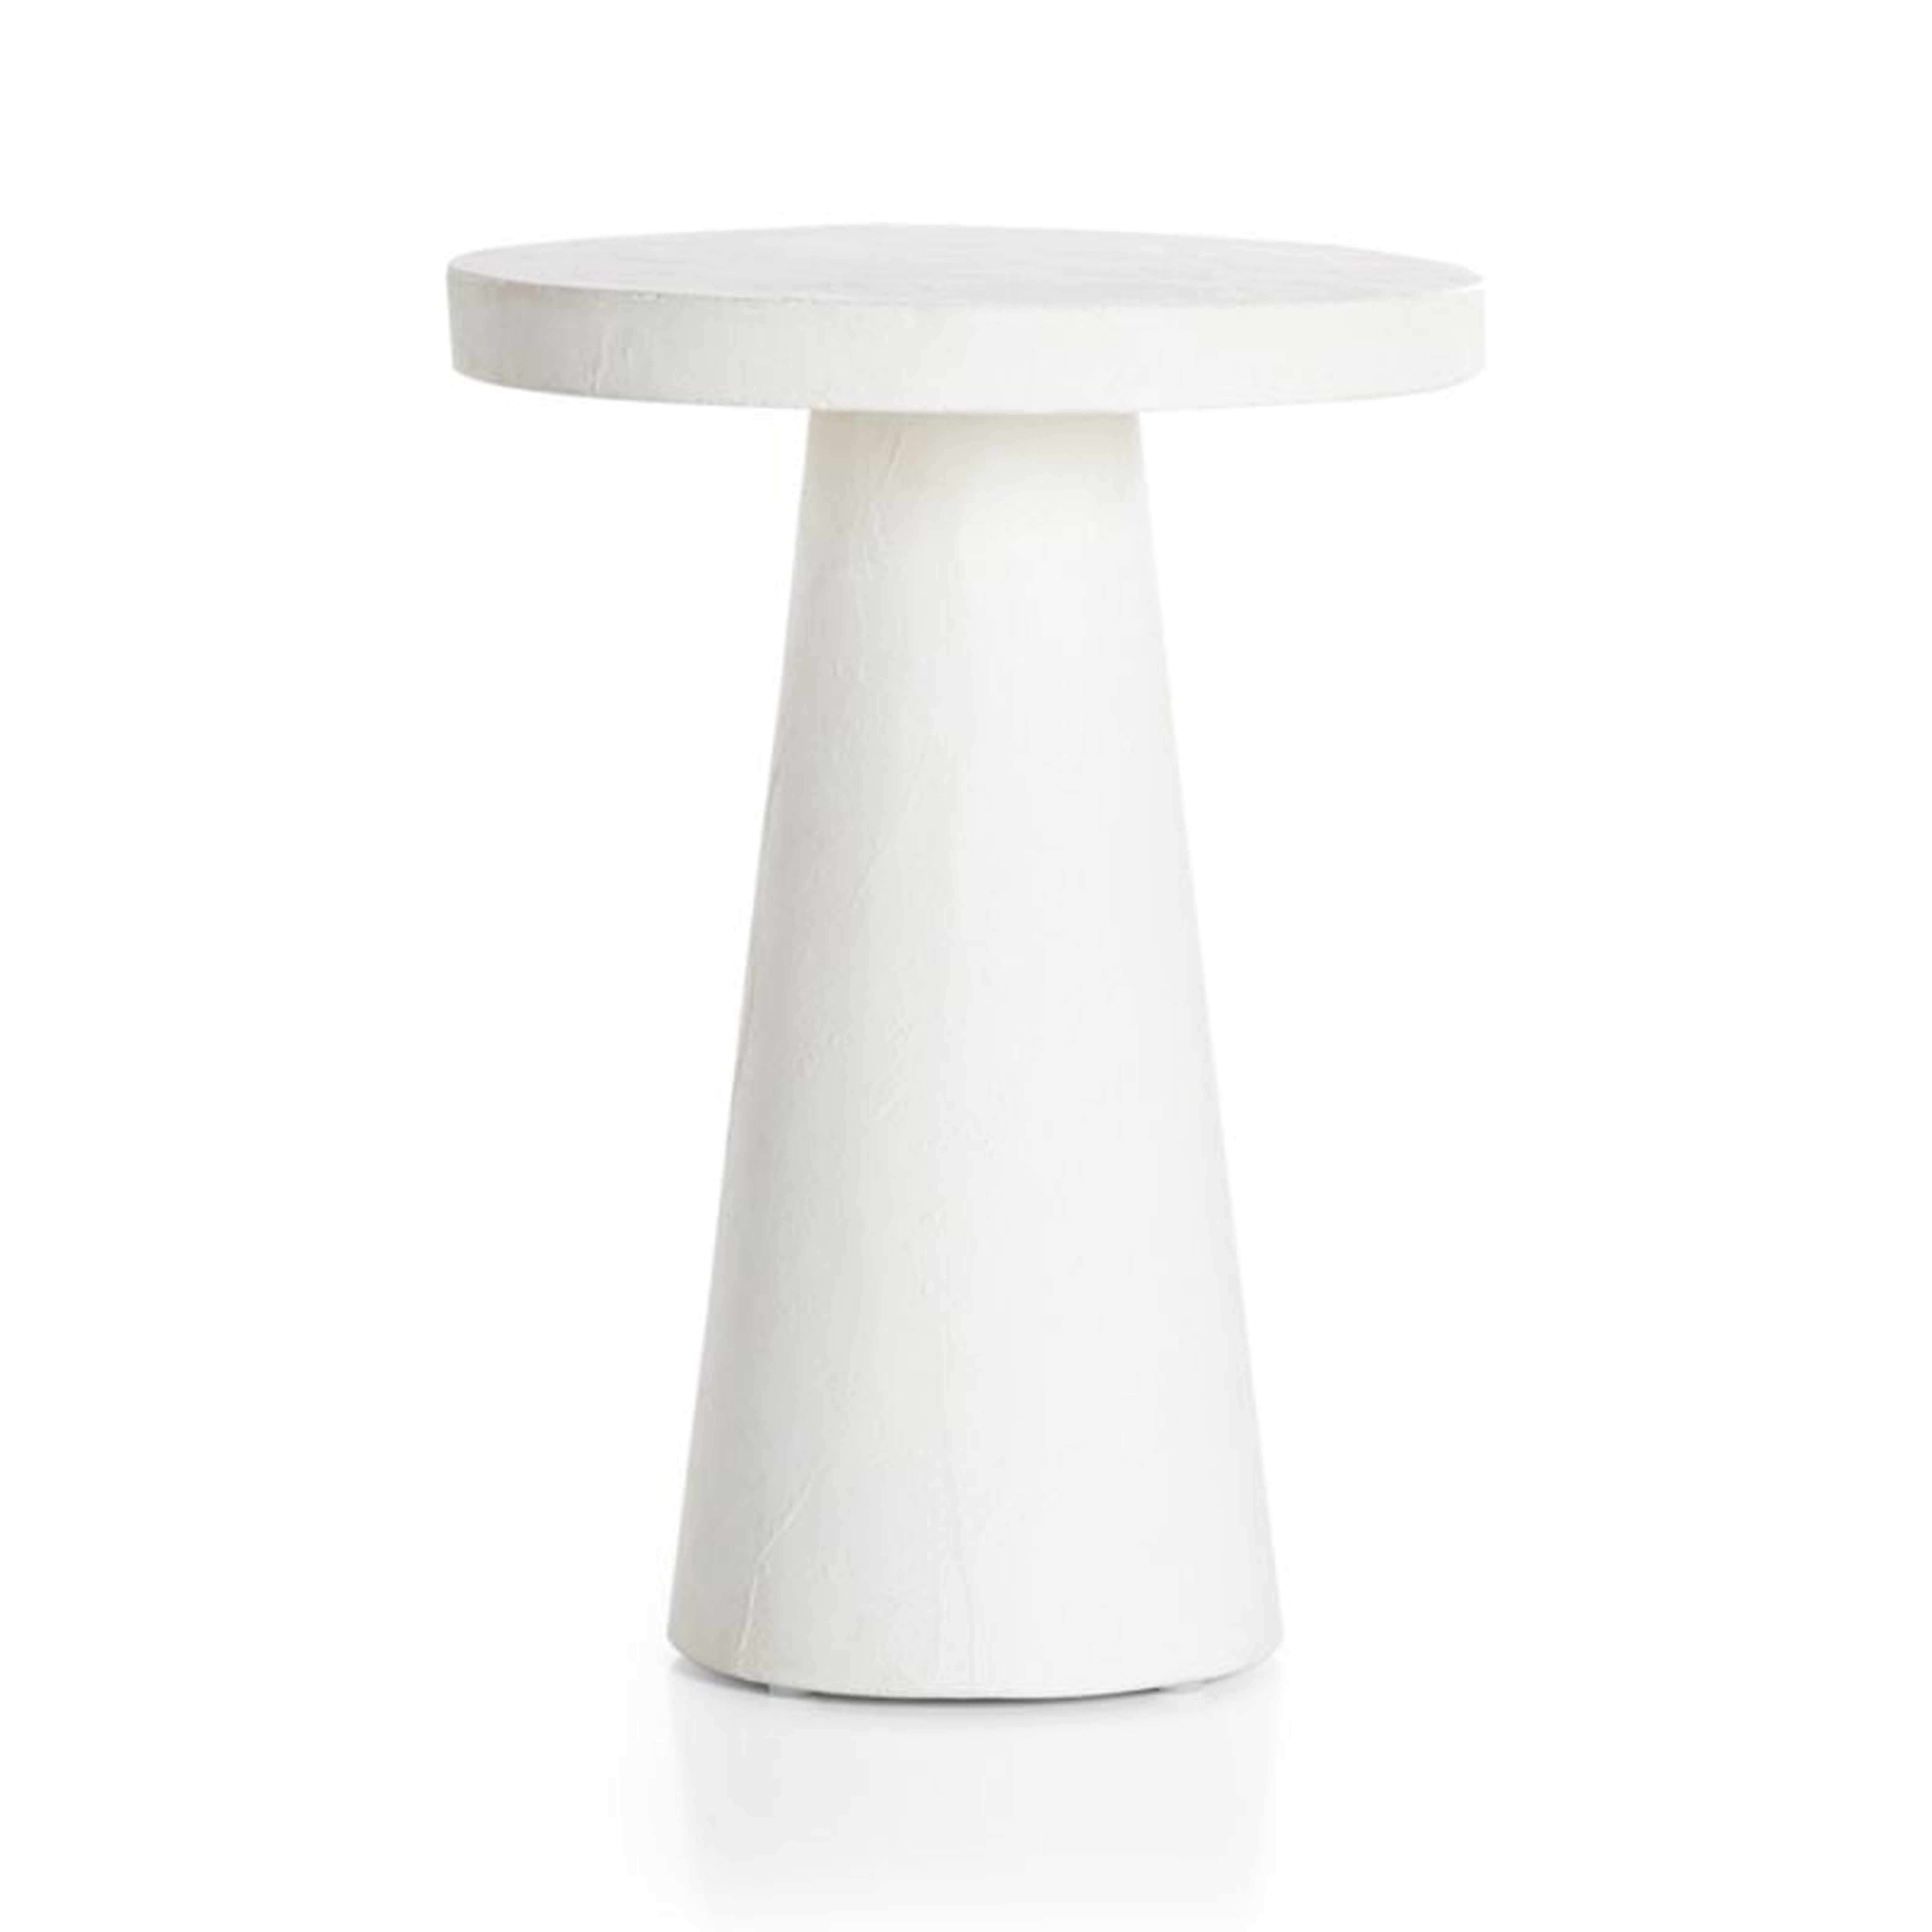 Willy Plaster Pedestal Side Table by Leanne Ford, White - Crate and Barrel